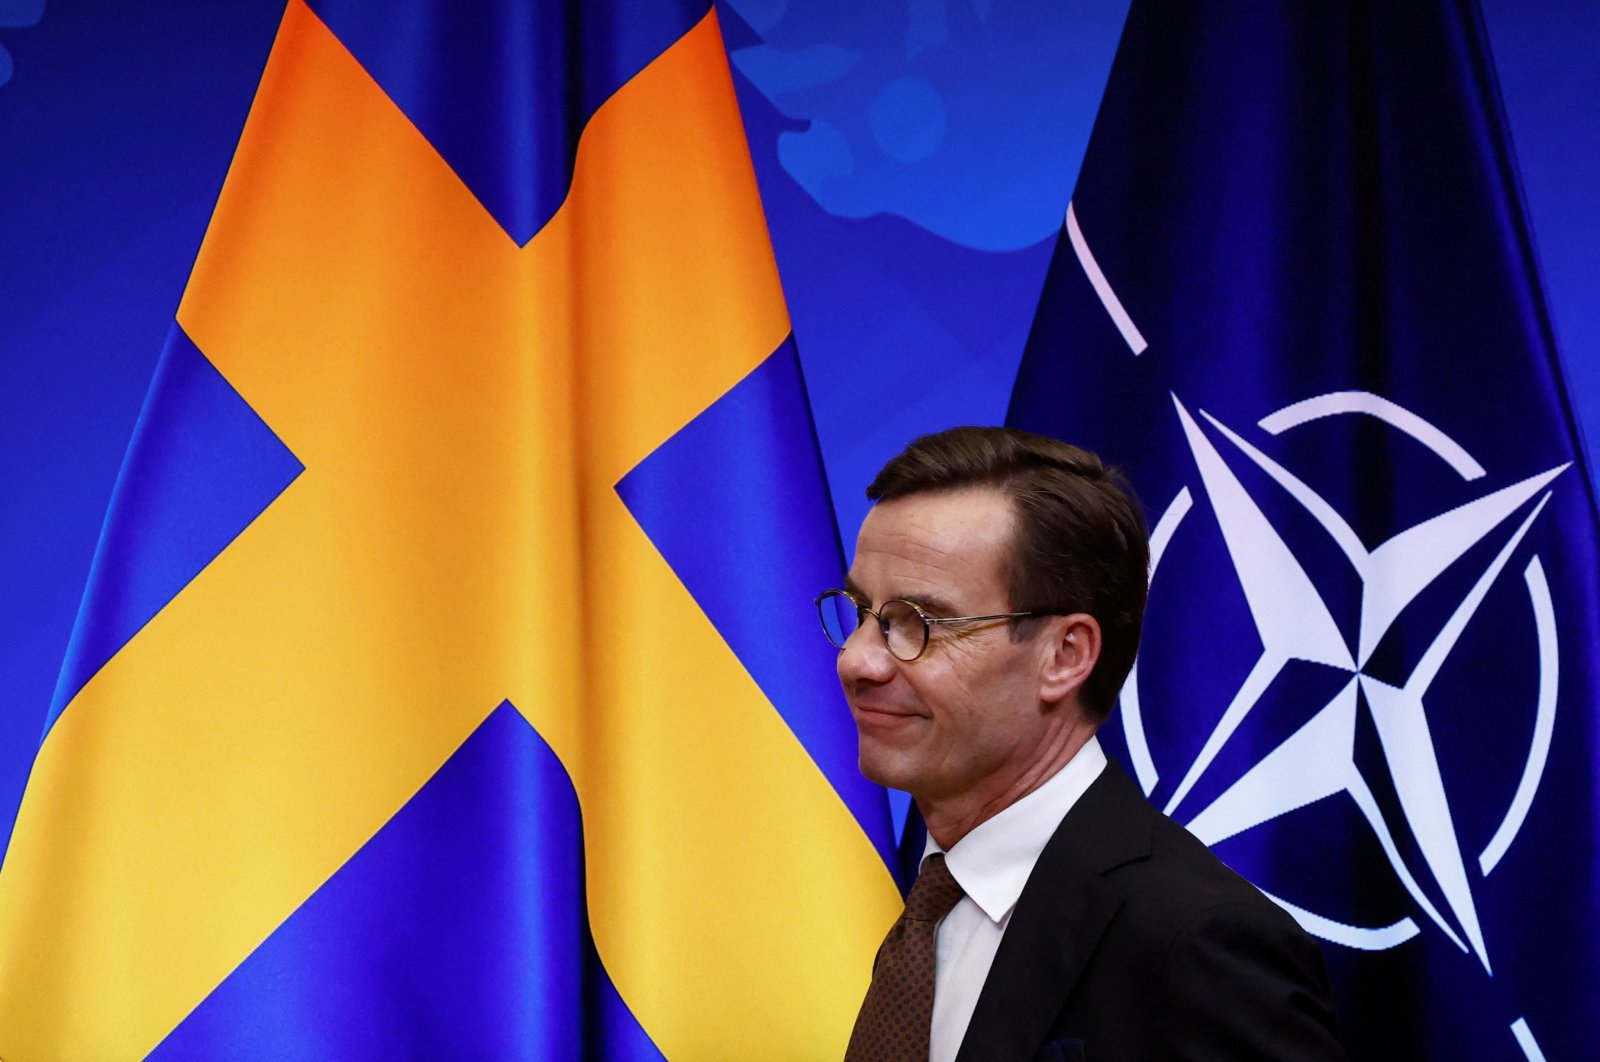 NATO Secretary General Jens Stoltenberg (not pictured) and Swedish Prime Minister Ulf Kristersson arrive to hold a news conference after a meeting at the Alliance&#039;s headquarters in Brussels, Belgium, Oct. 20, 2022. (Reuters Photo)